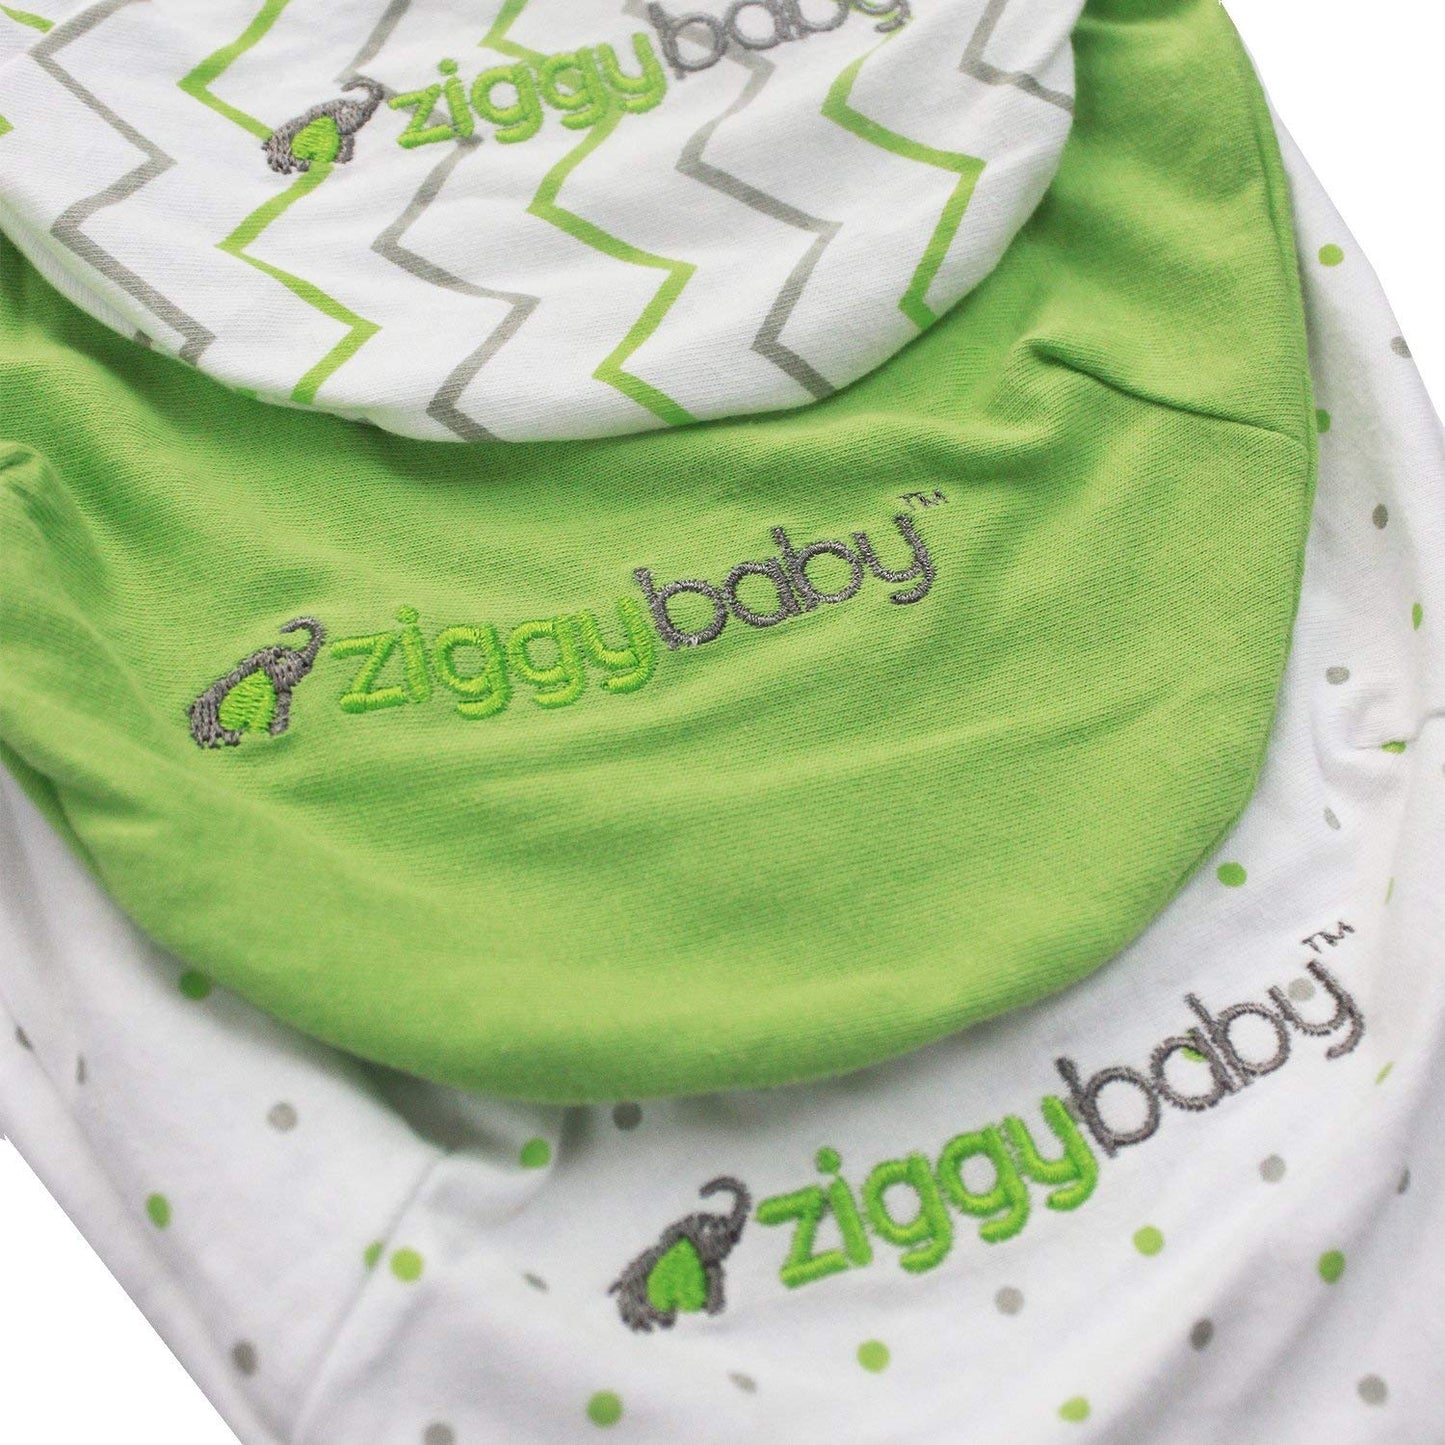 Baby Swaddle Blanket Wrap Set (3 Pack) Green, Grey Chevron, Dot, Solid